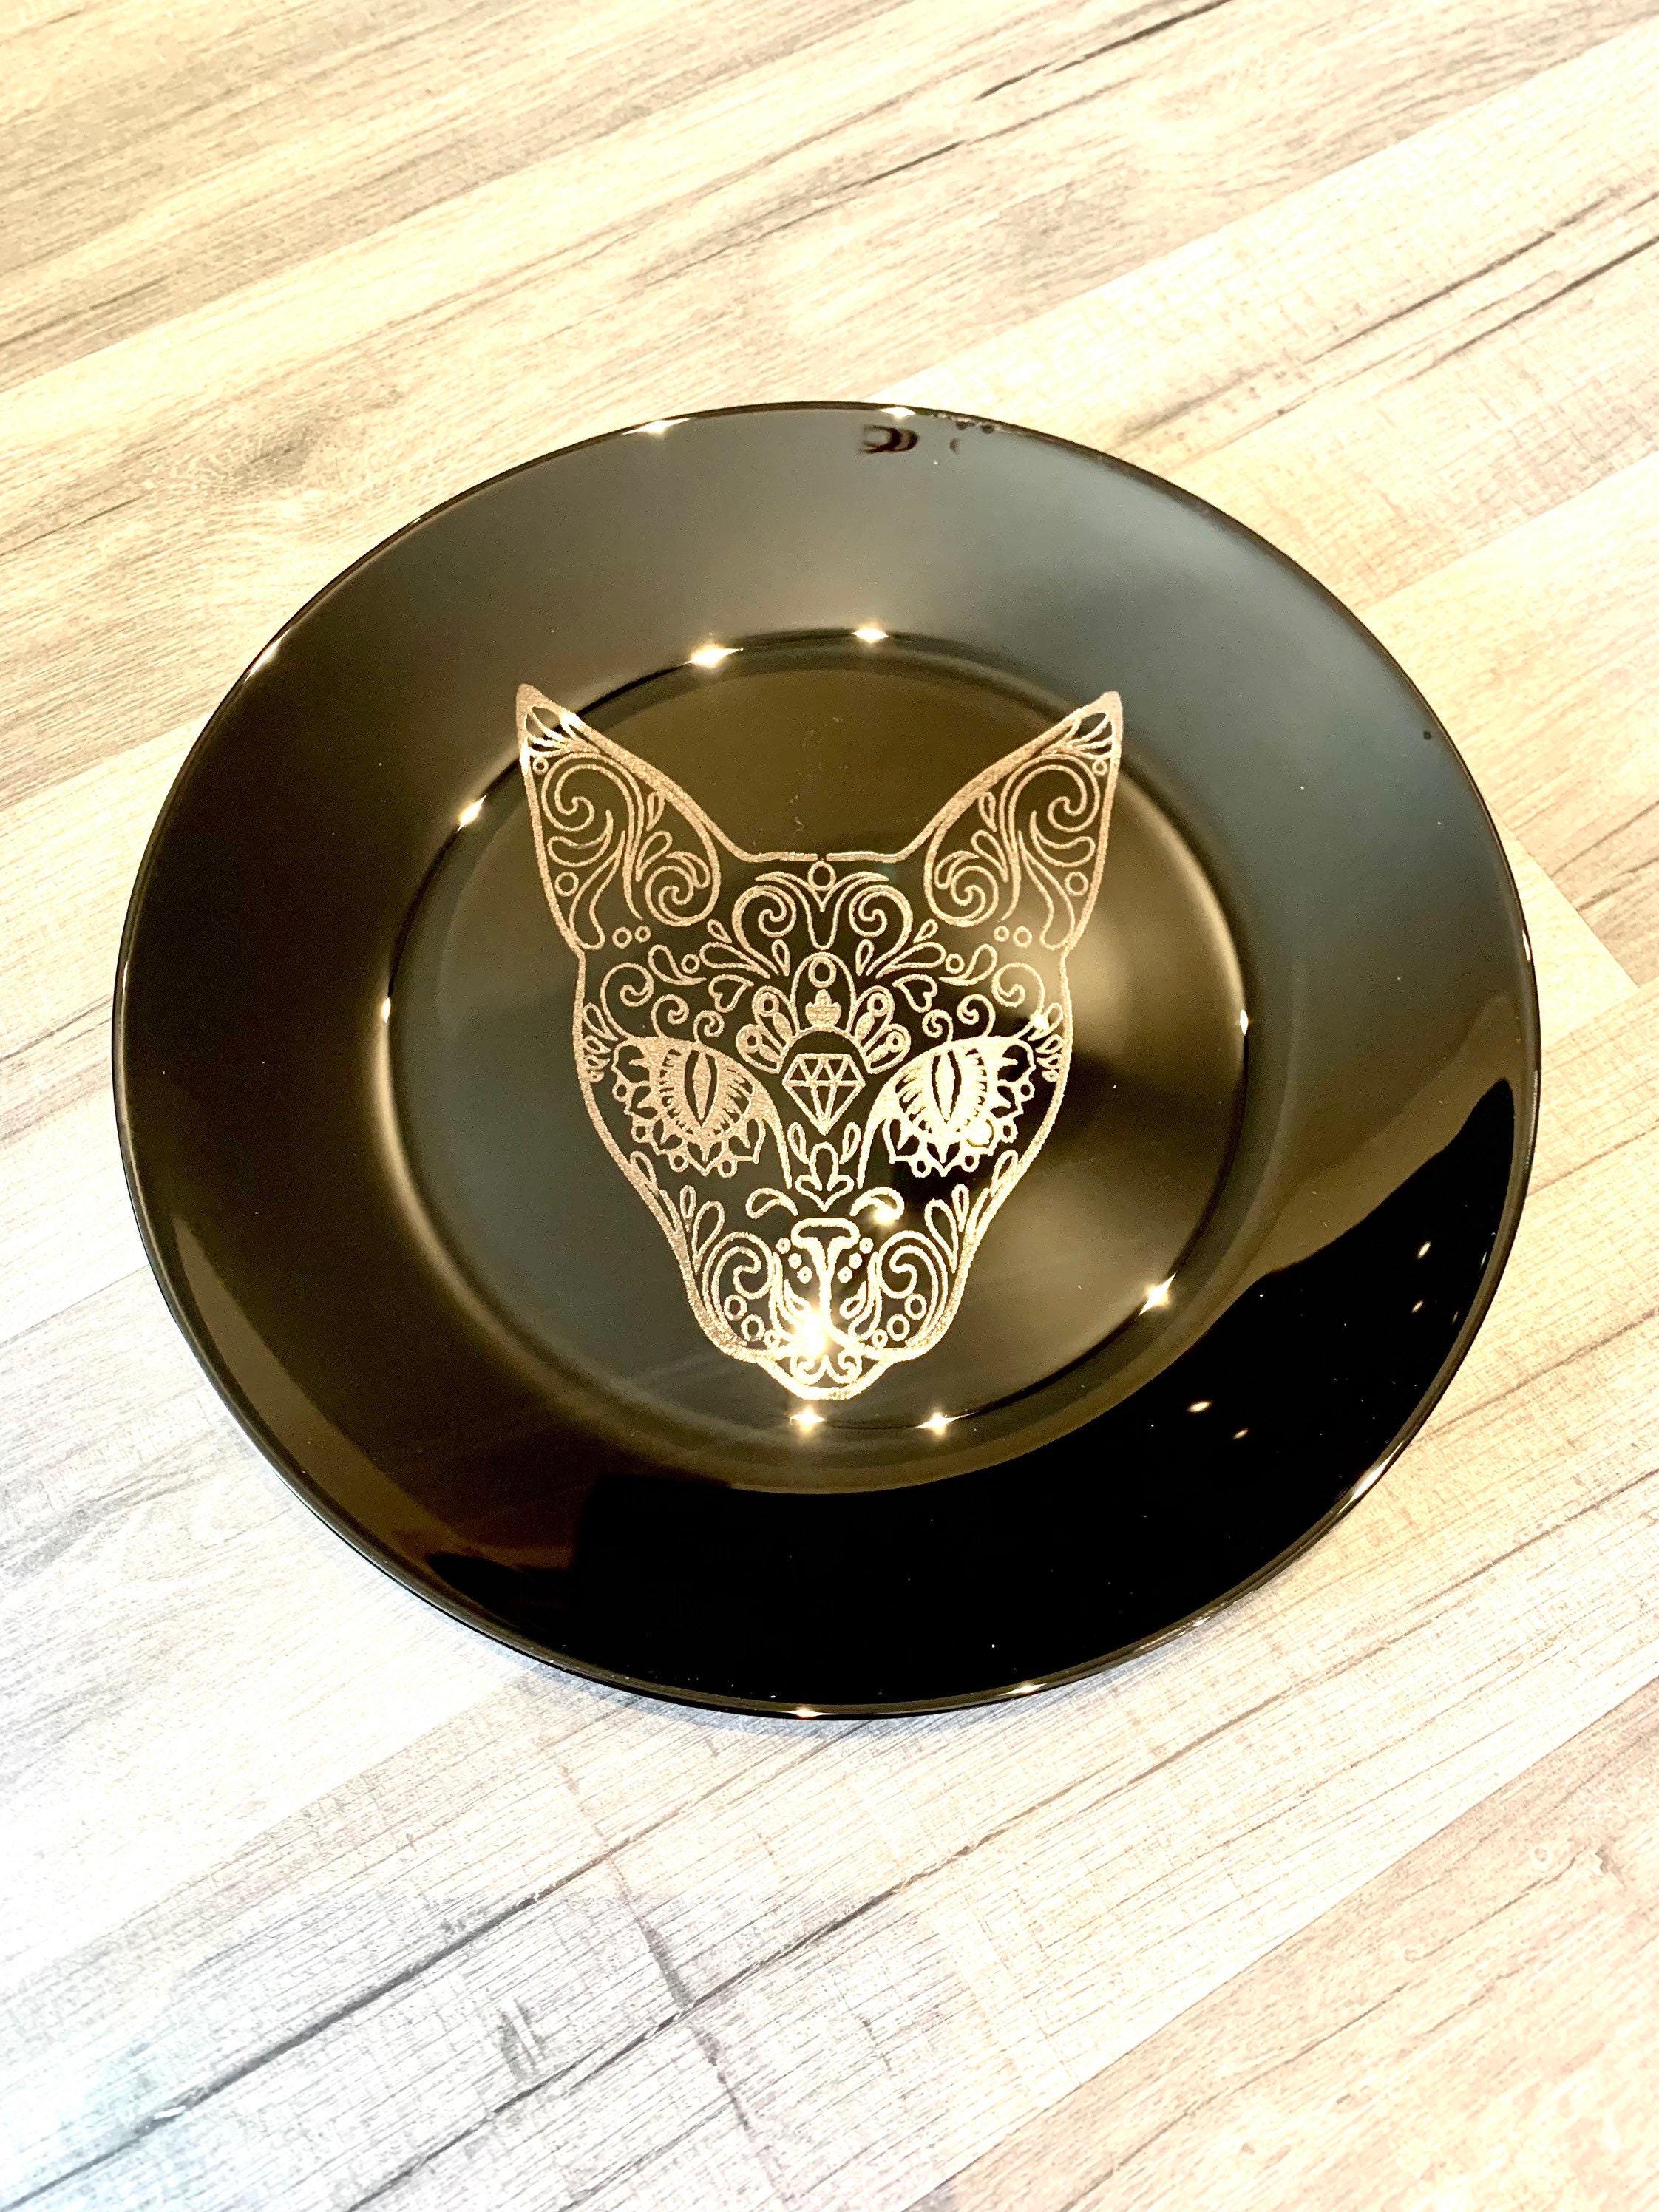 Top Paw Food & Water Bowls  Black Melamine & Stainless Steel Double Diner  Bowl - Dog < Fred Studio Photo